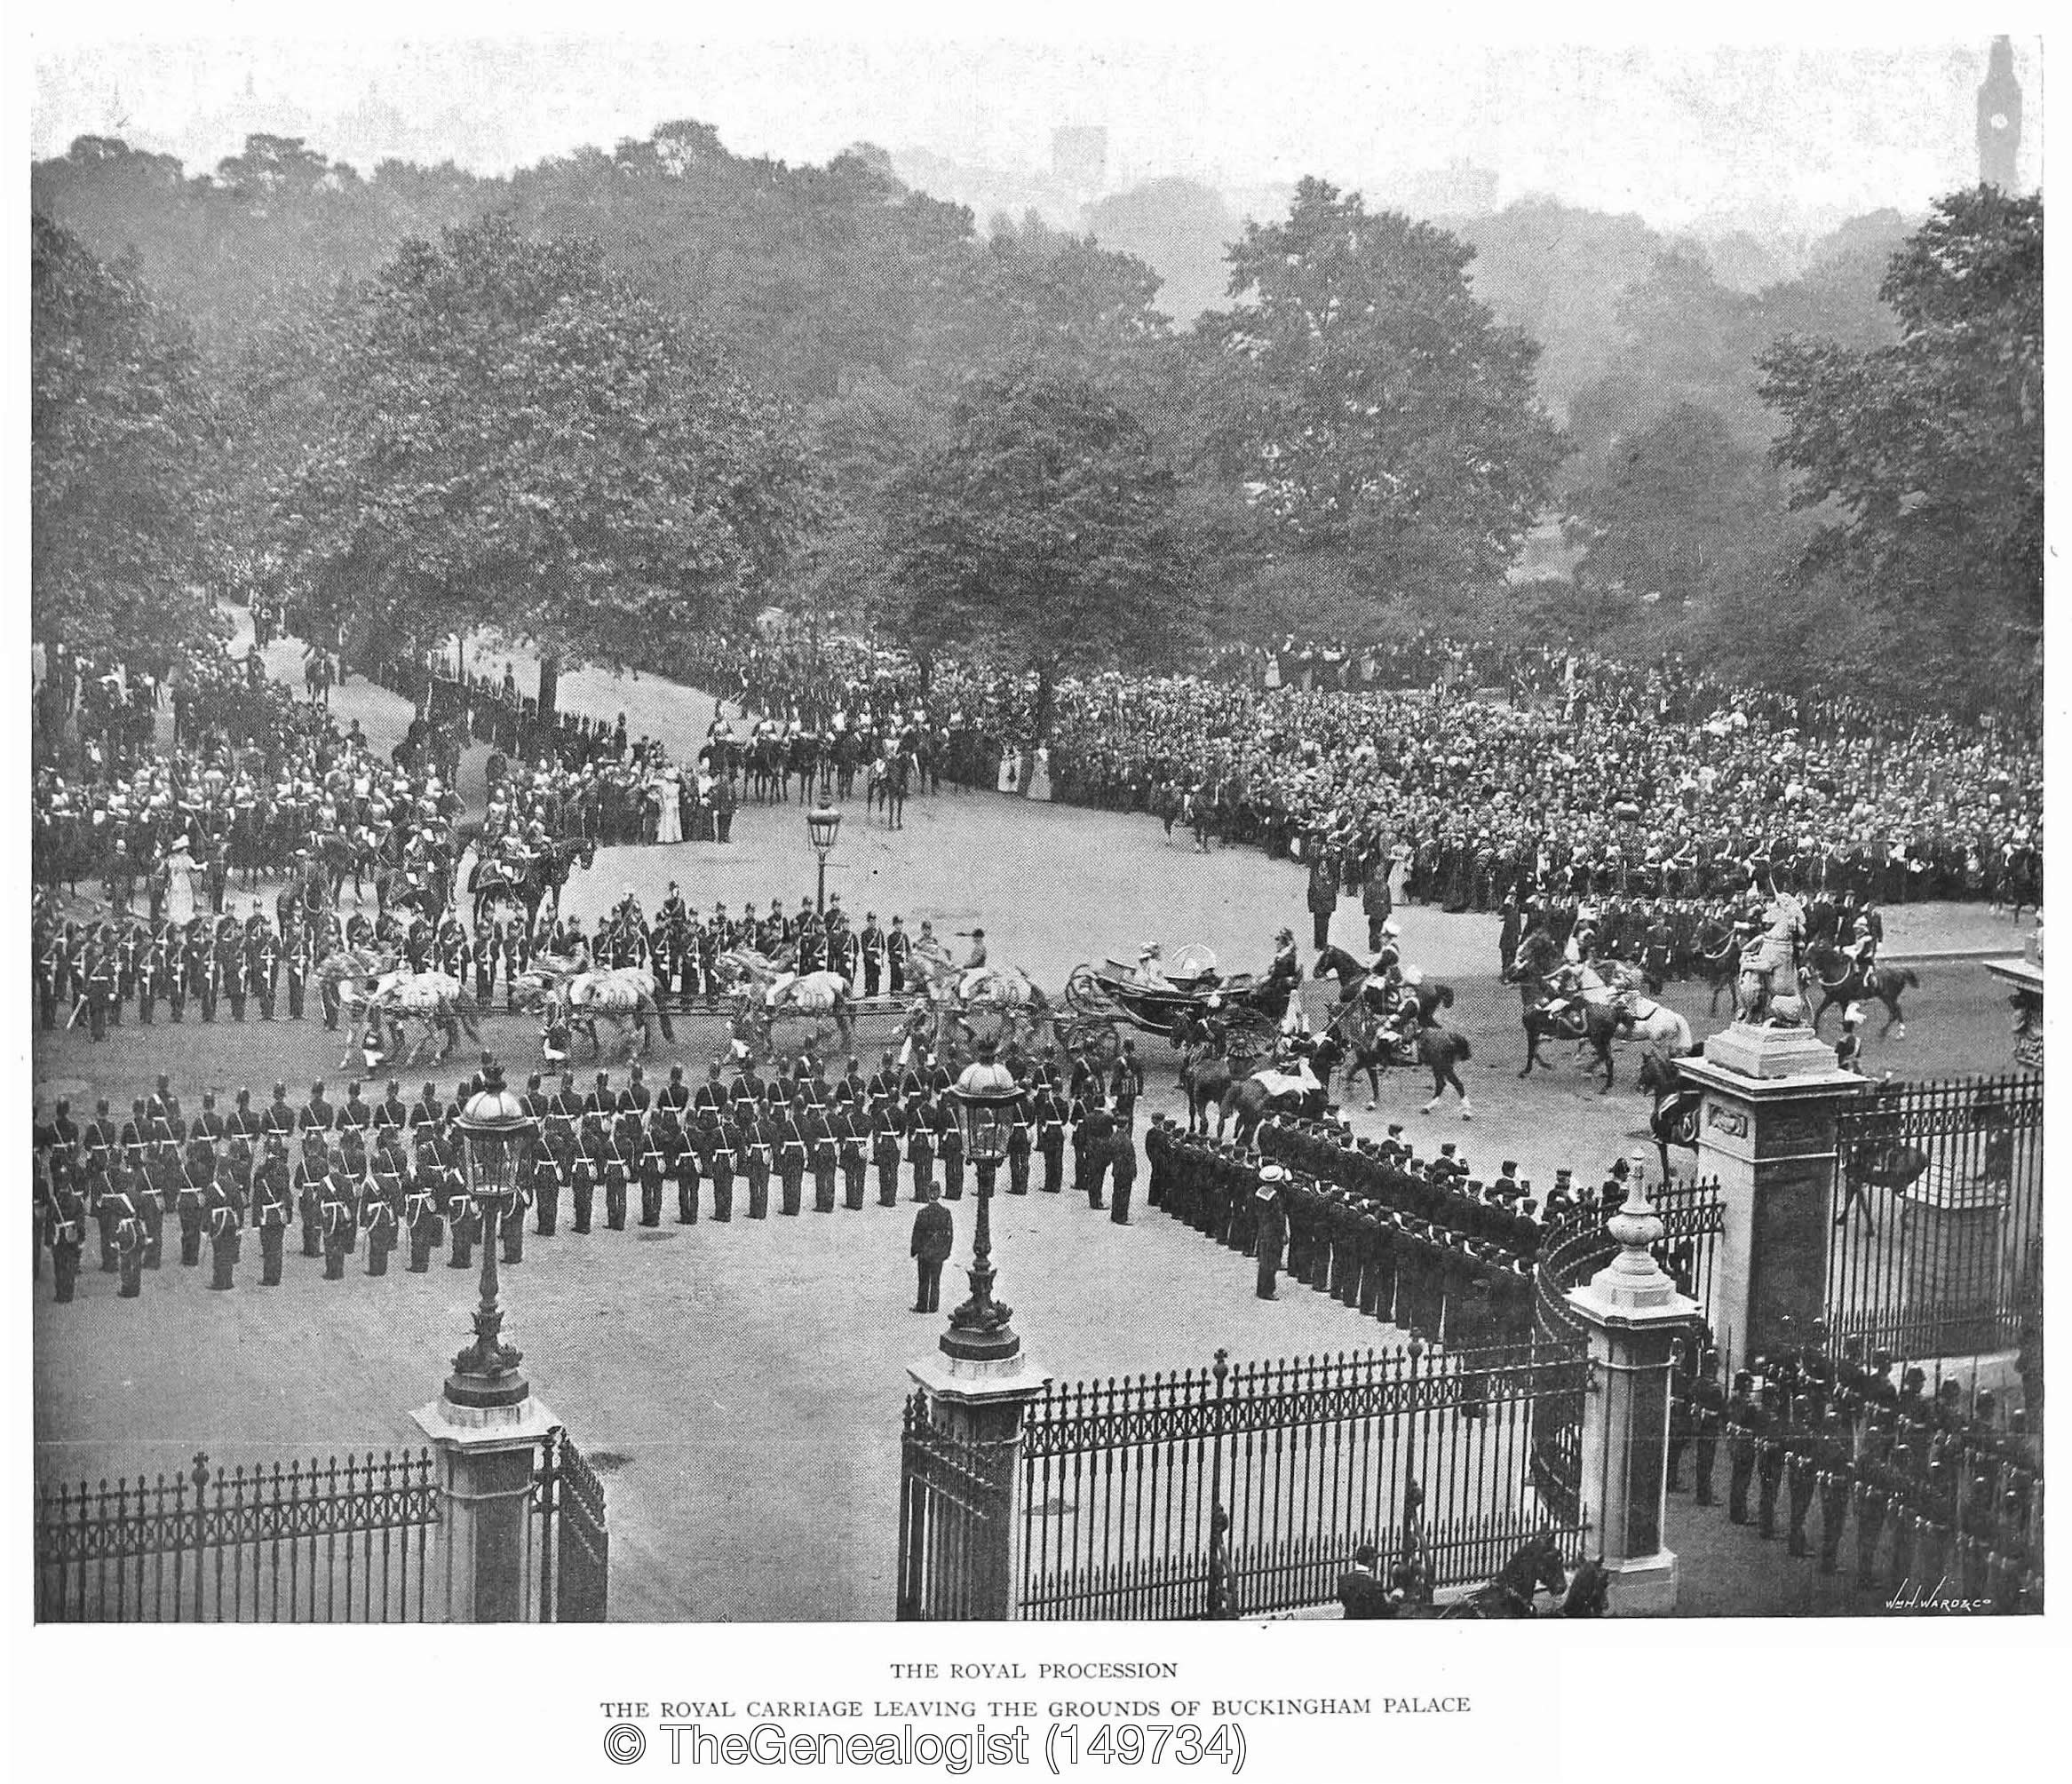 Queen Victoria's Diamond Jubilee in 1897 leaving Buckingham Palace from the Peerage, Gentry & Royalty Records on
		TheGenealogist